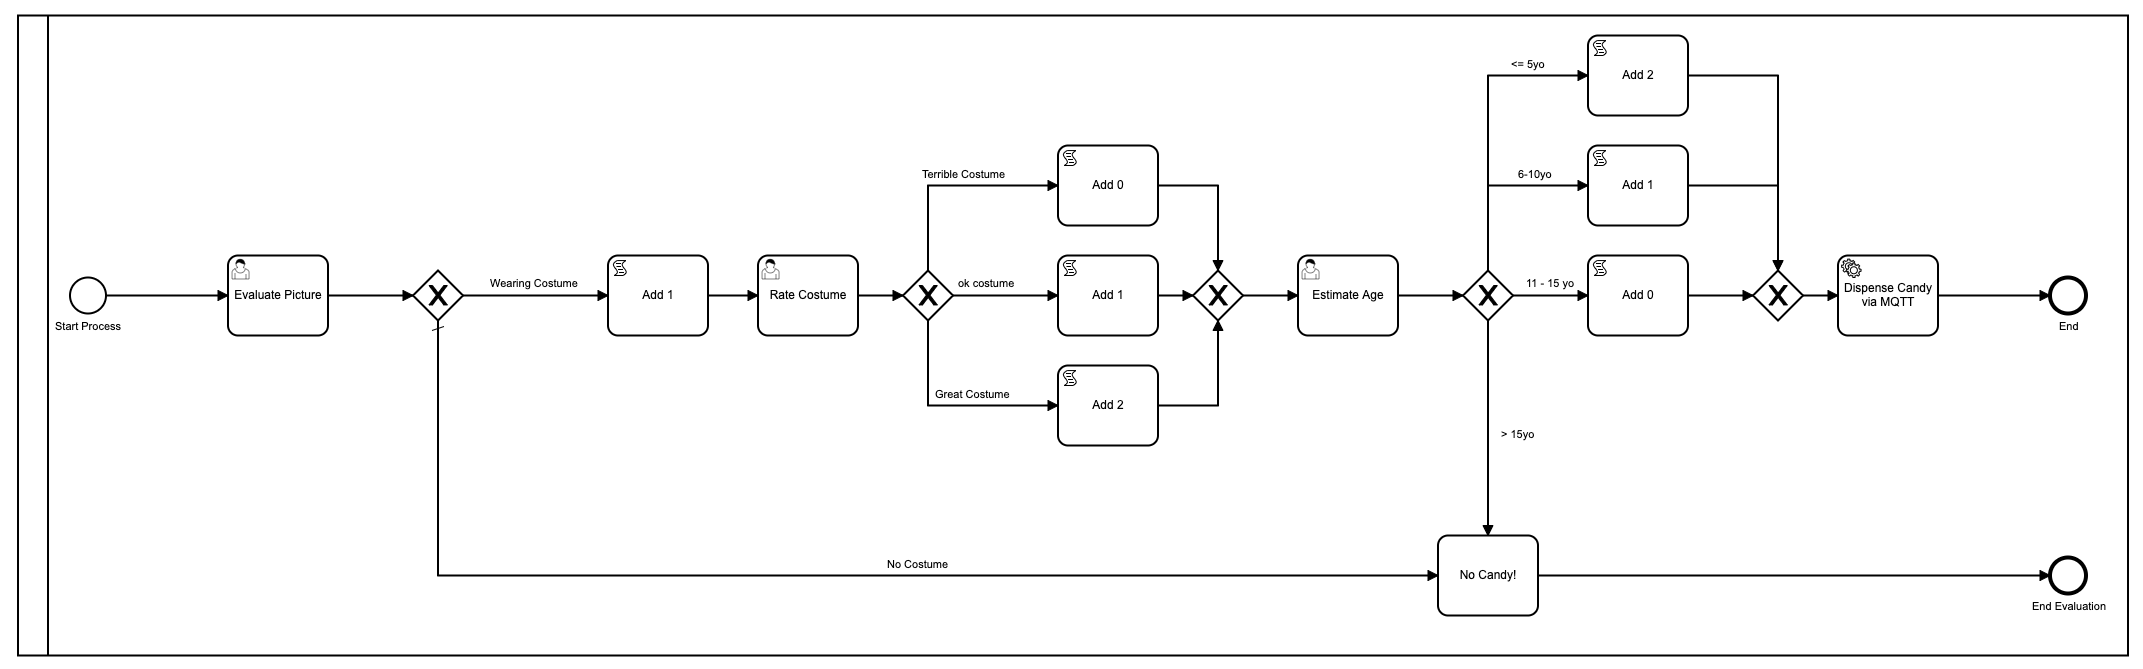 BPMN Model with multiple steps and 3 human tasks